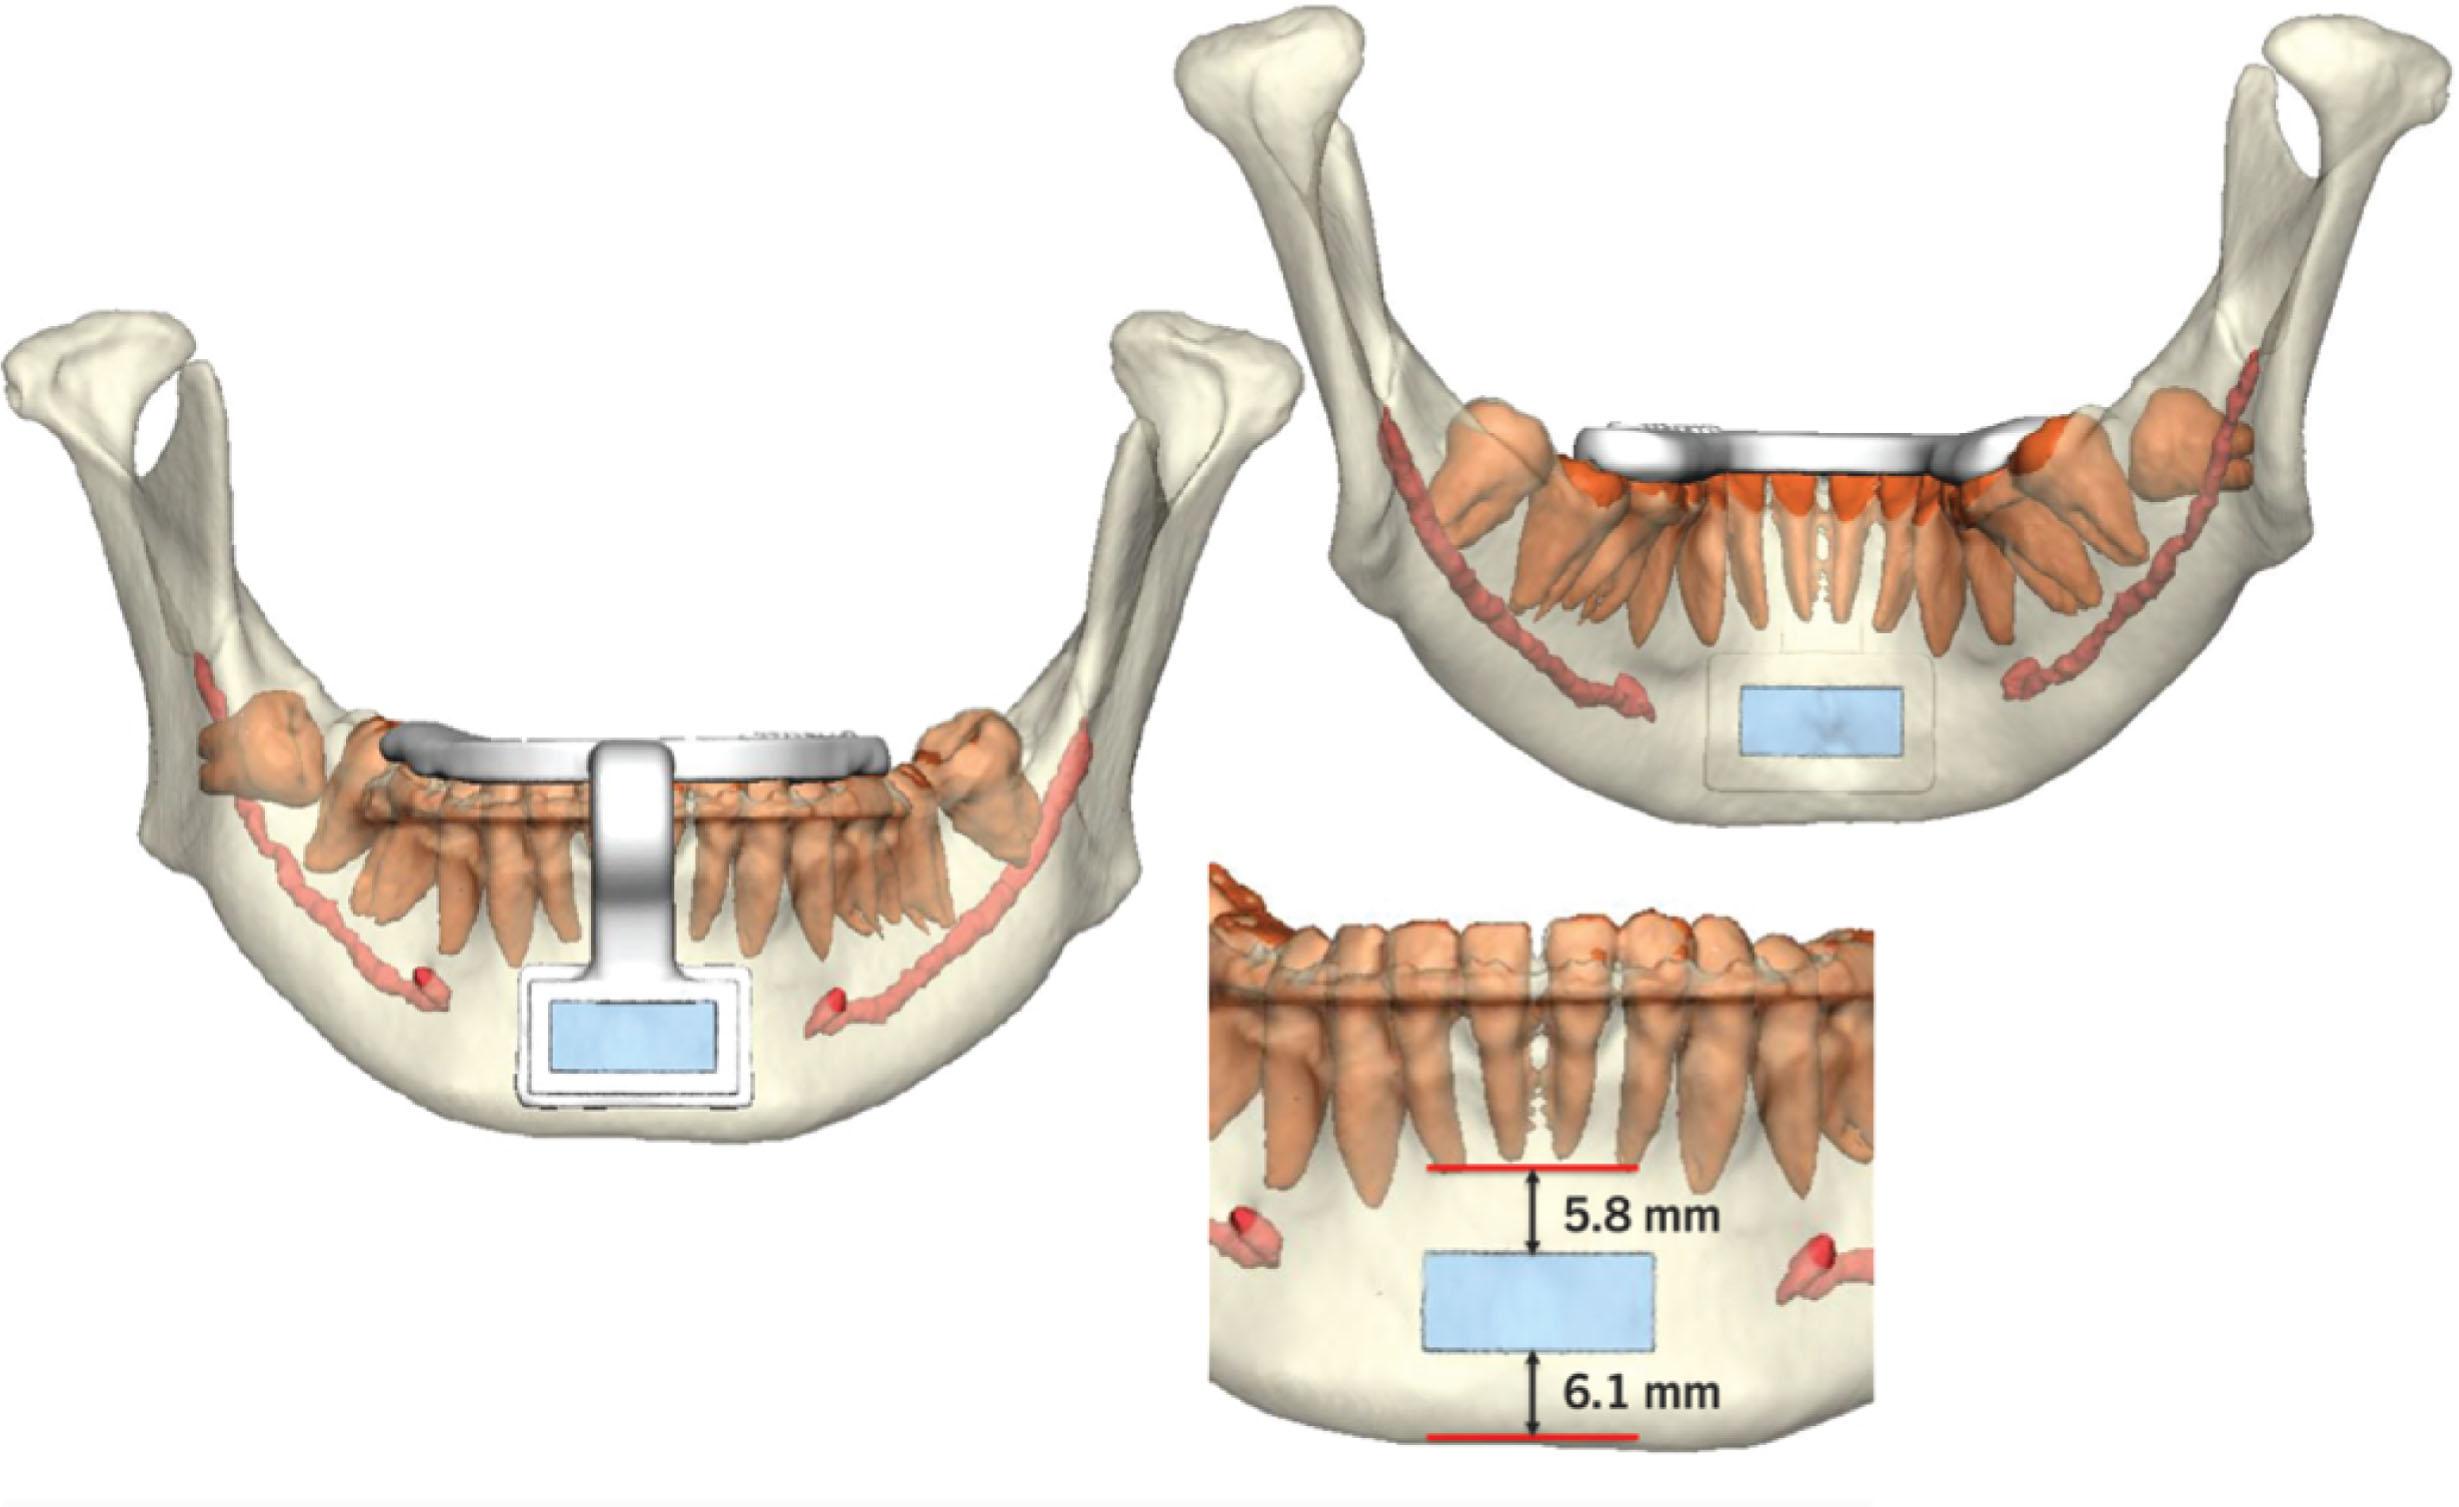 Figure 6.2.5, Tooth-borne polyamide guide designed for genioglossus advancement. Custom guide designs are helpful for precision osteotomies to avoid the tooth roots while also capturing the genial tubercles.